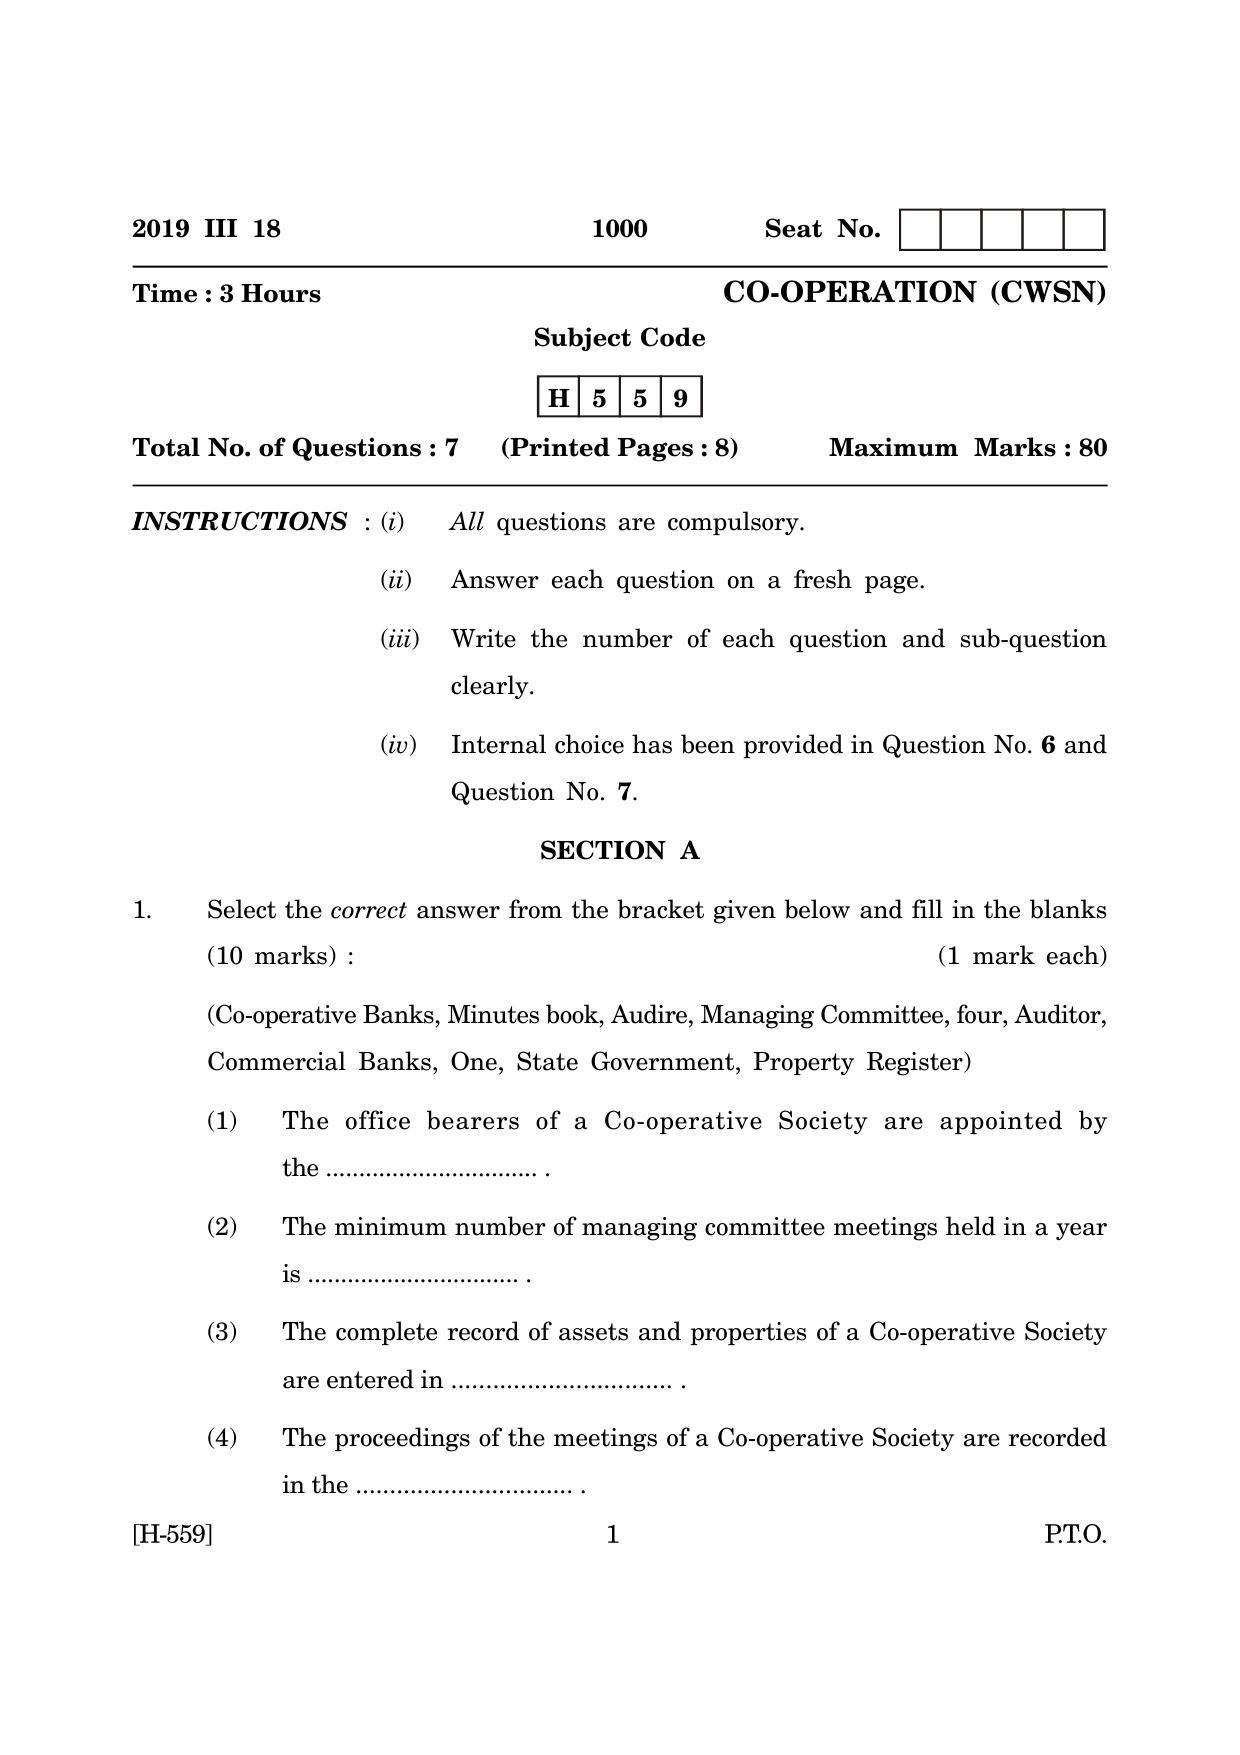 Goa Board Class 12 Co-operation(CWSN)  2019 (March 2019) Question Paper - Page 1